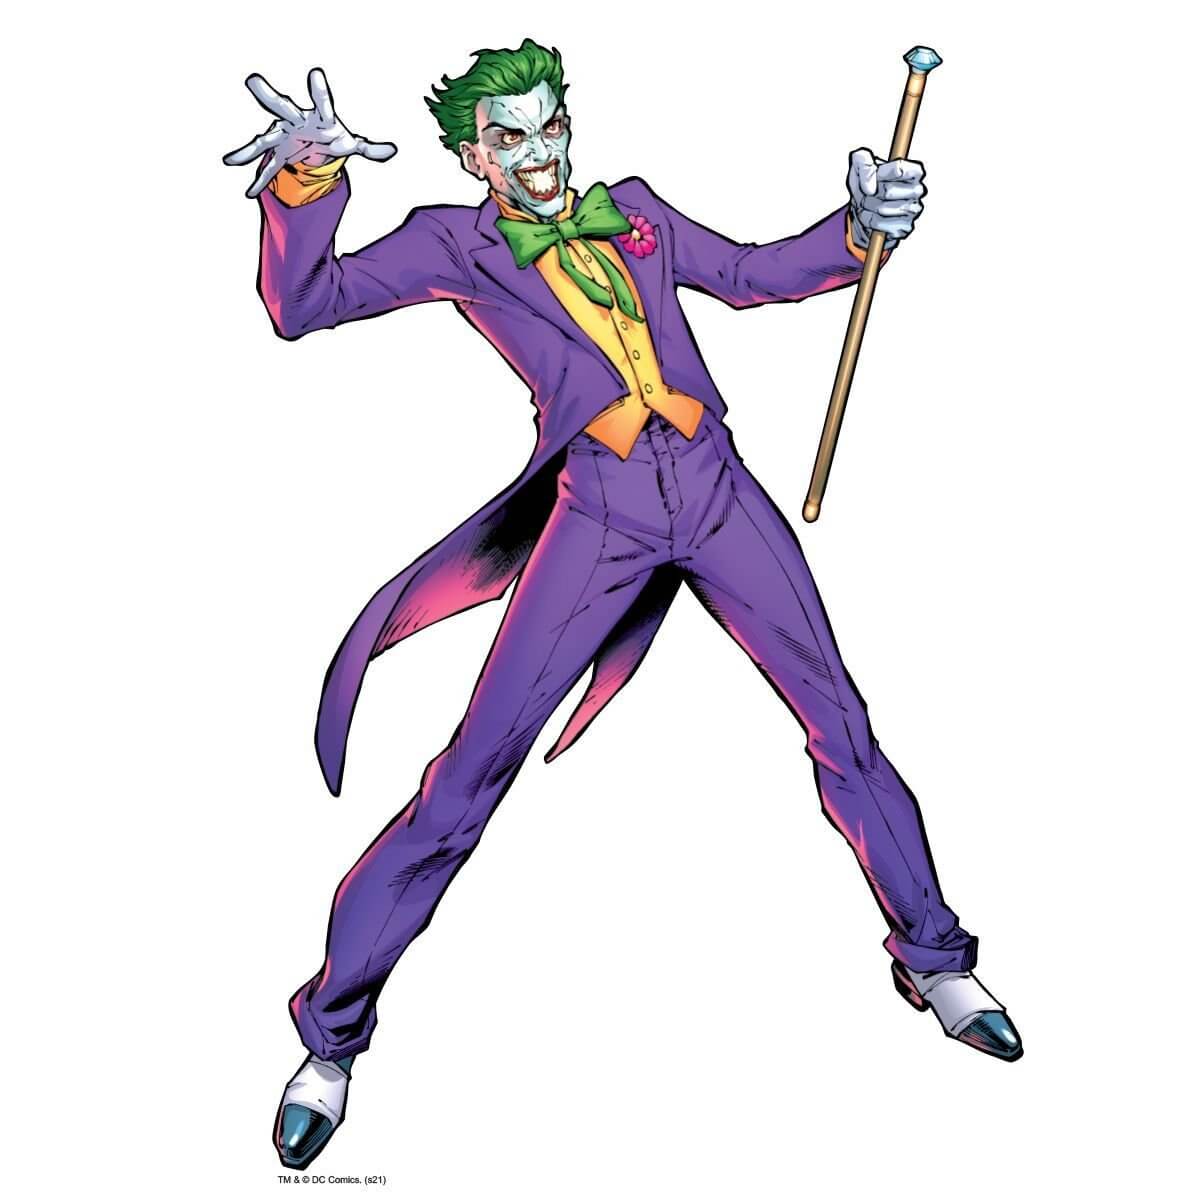 Kismet Decals Joker The Clown Prince Licensed Wall Sticker - Easy DIY Justice League Home & Room Decor Wall Art - Kismet Decals